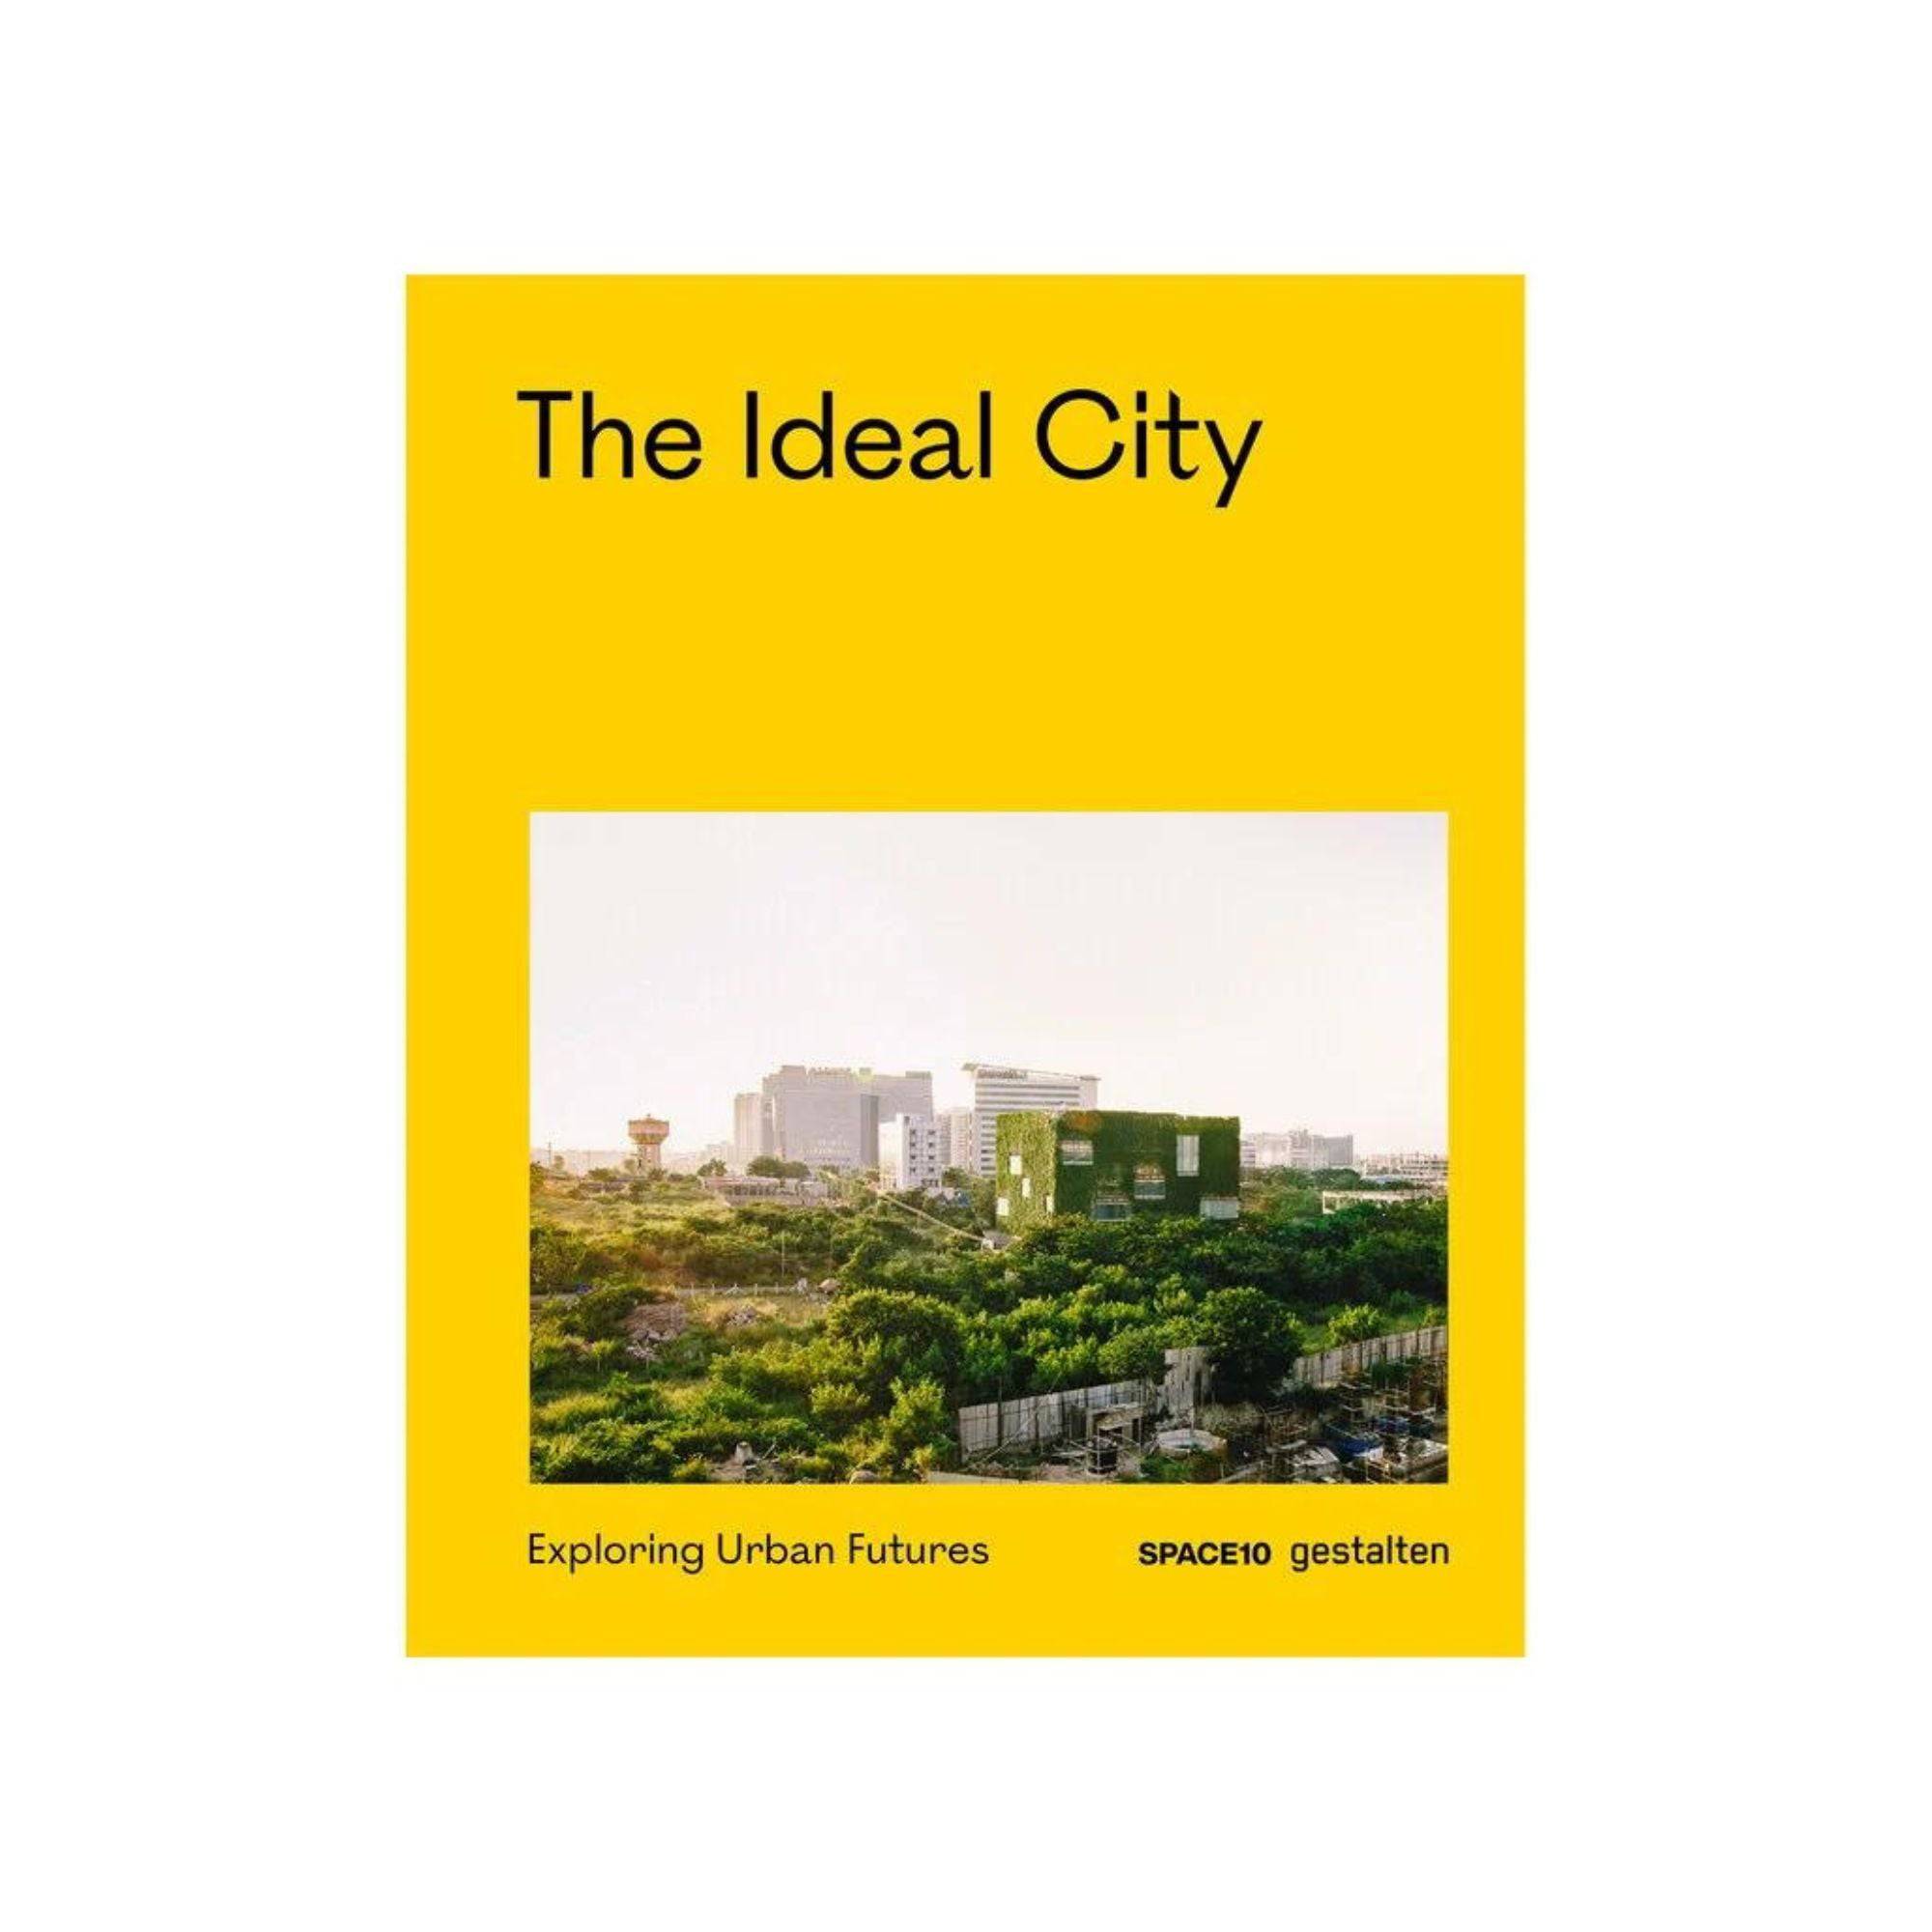 The Ideal City - THAT COOL LIVING